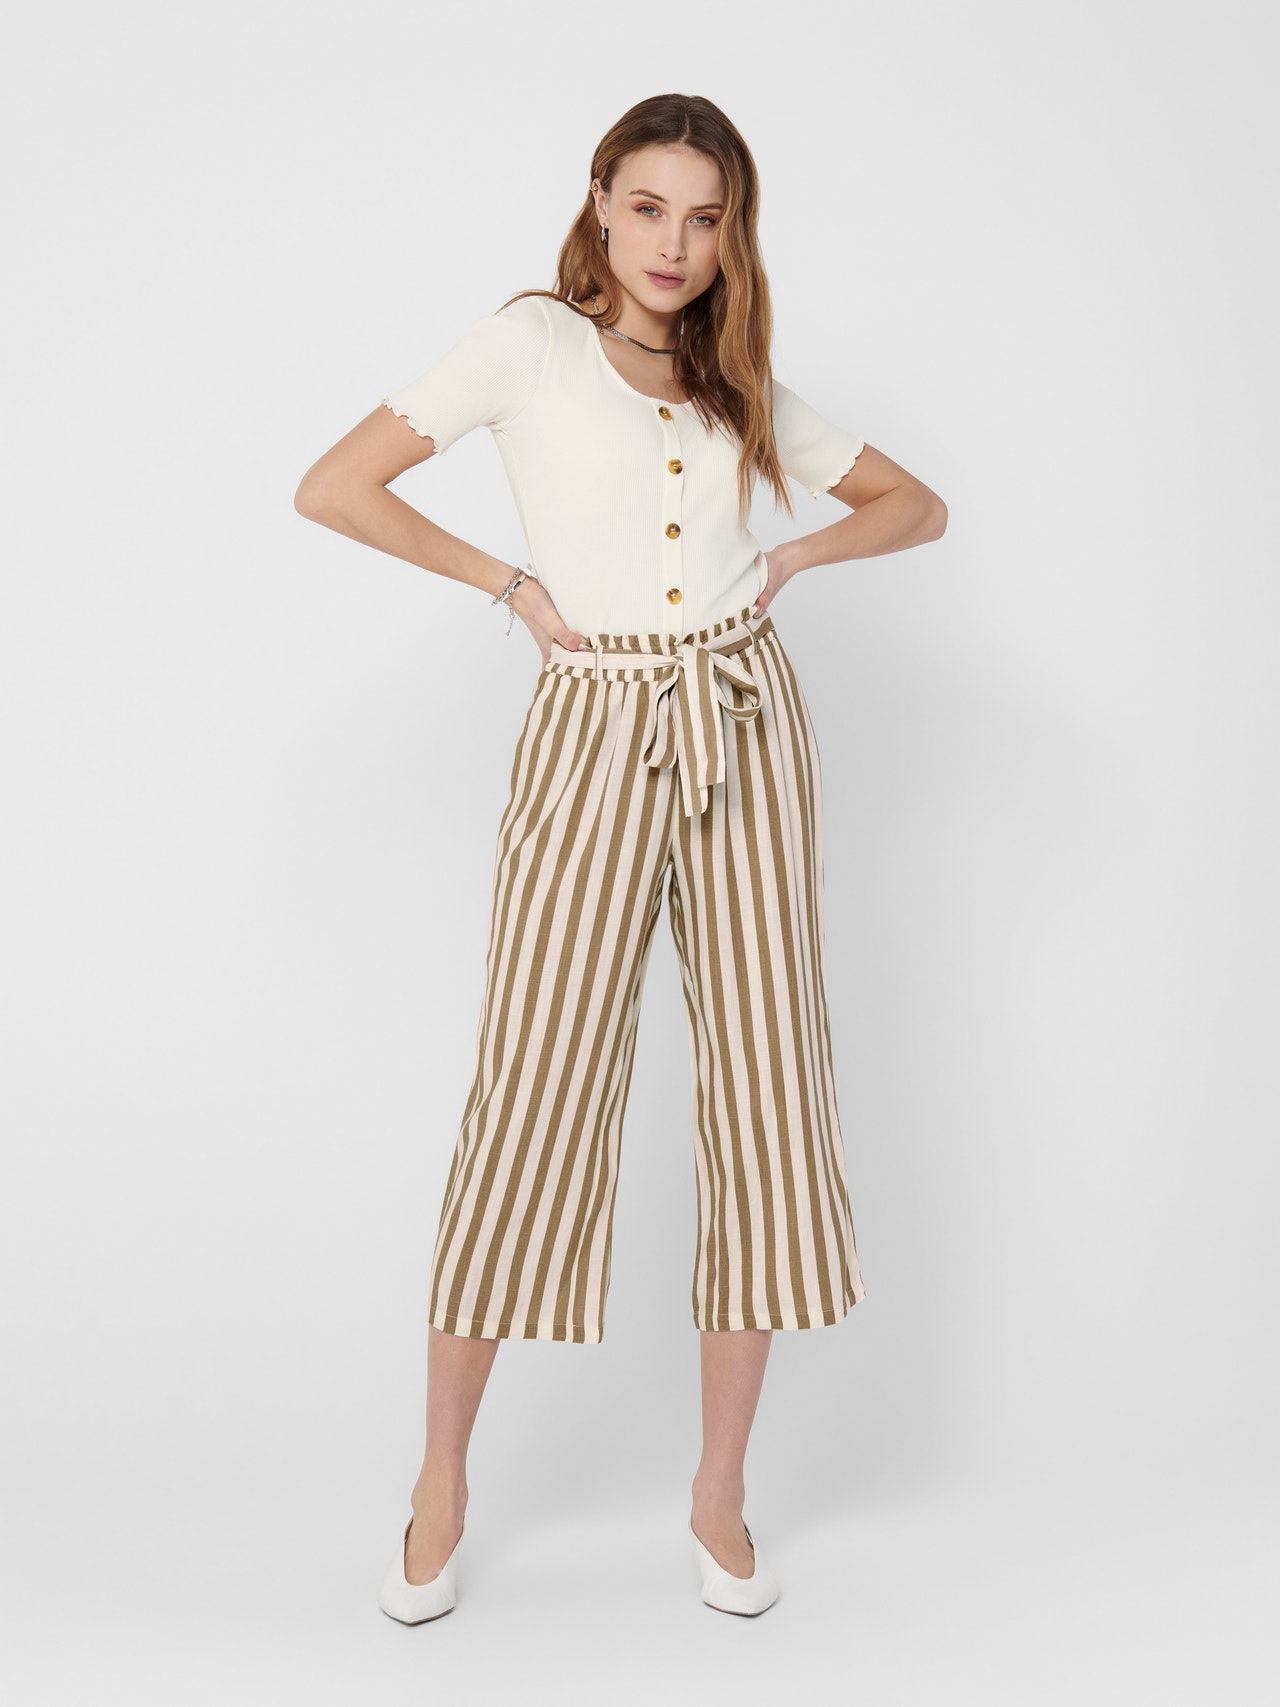 ONLY Striped Trousers -Cloud Dancer - 15191620